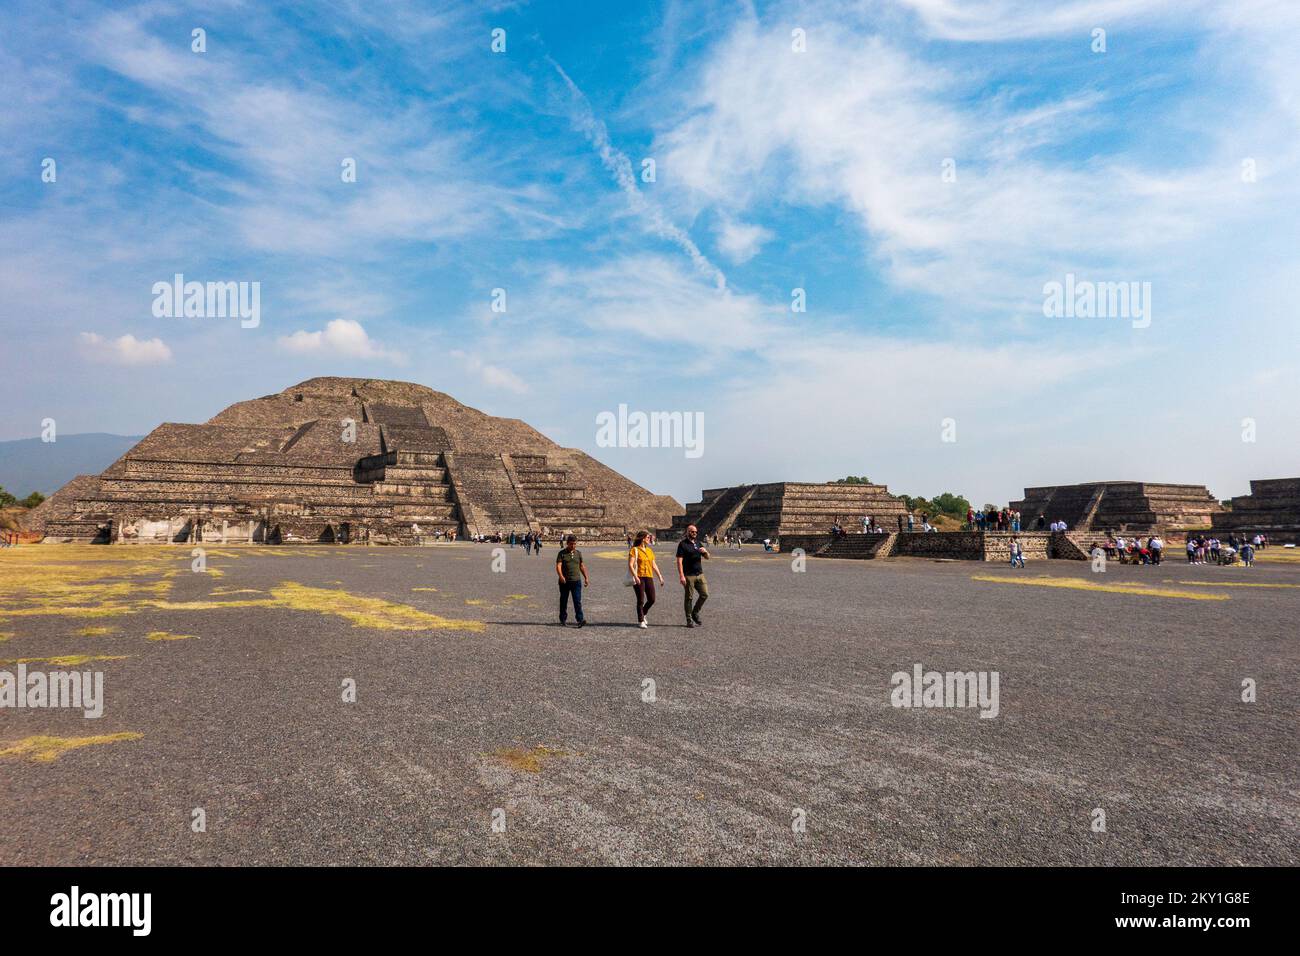 Mexico ancient city Teotihuacan Stock Photo - Alamy